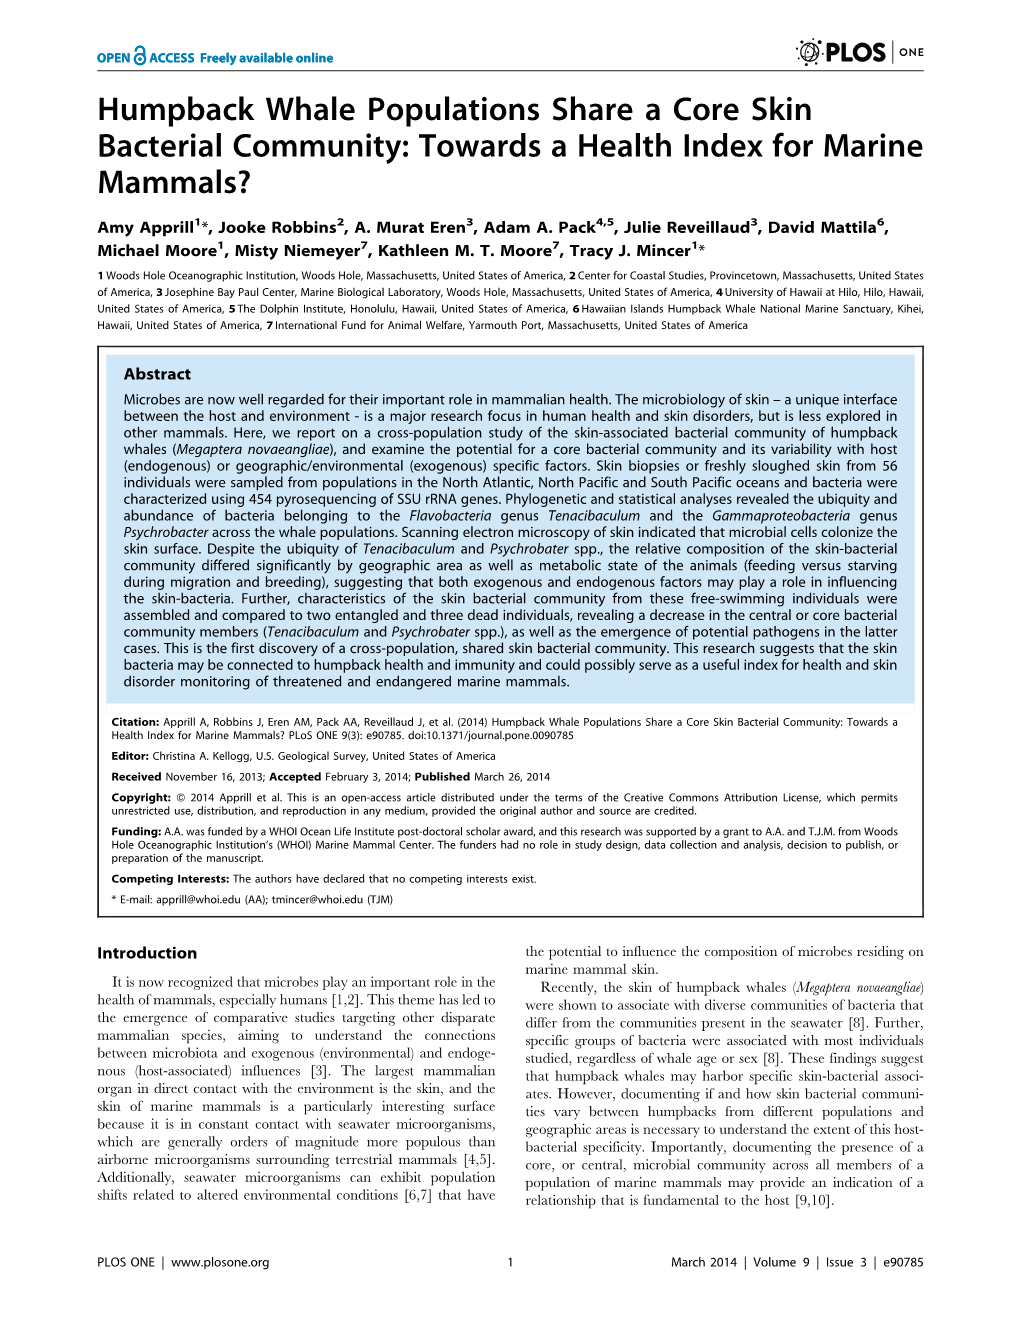 Humpback Whale Populations Share a Core Skin Bacterial Community: Towards a Health Index for Marine Mammals?